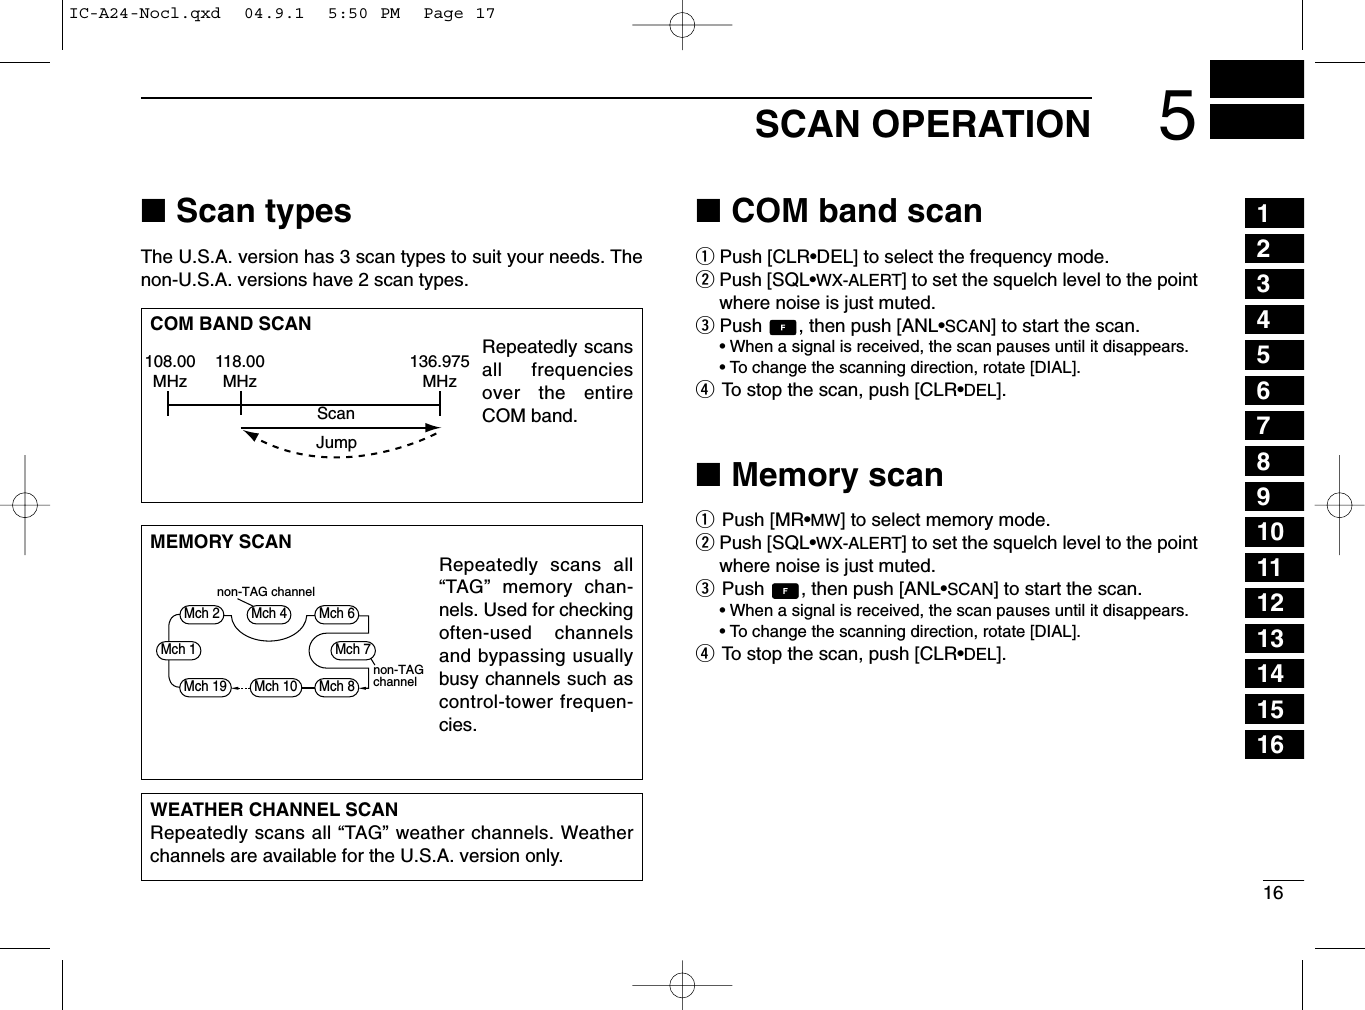 165SCAN OPERATION■Scan typesThe U.S.A. version has 3 scan types to suit your needs. Thenon-U.S.A. versions have 2 scan types.■COM band scanqPush [CLR•DEL] to select the frequency mode.wPush [SQL•WX-ALERT] to set the squelch level to the pointwhere noise is just muted.ePush  , then push [ANL•SCAN] to start the scan.• When a signal is received, the scan pauses until it disappears.•To change the scanning direction, rotate [DIAL].rTo stop the scan, push [CLR•DEL].■Memory scanqPush [MR•MW] to select memory mode.wPush [SQL•WX-ALERT] to set the squelch level to the pointwhere noise is just muted.ePush  , then push [ANL•SCAN] to start the scan.• When a signal is received, the scan pauses until it disappears.•To change the scanning direction, rotate [DIAL].rTo stop the scan, push [CLR•DEL].WEATHER CHANNEL SCANRepeatedly scans all “TAG” weather channels. Weatherchannels are available for the U.S.A. version only.MEMORY SCANRepeatedly scans all“TAG” memory chan-nels. Used for checkingoften-used channelsand bypassing usuallybusy channels such ascontrol-tower frequen-cies.COM BAND SCANRepeatedly scansall frequenciesover the entireCOM band.108.00MHzScanJump118.00MHz136.975MHznon-TAGchannelnon-TAG channelMch 2 Mch 4 Mch 6Mch 7Mch 1Mch 8Mch 10Mch 1912345678910111213141516IC-A24-Nocl.qxd  04.9.1  5:50 PM  Page 17